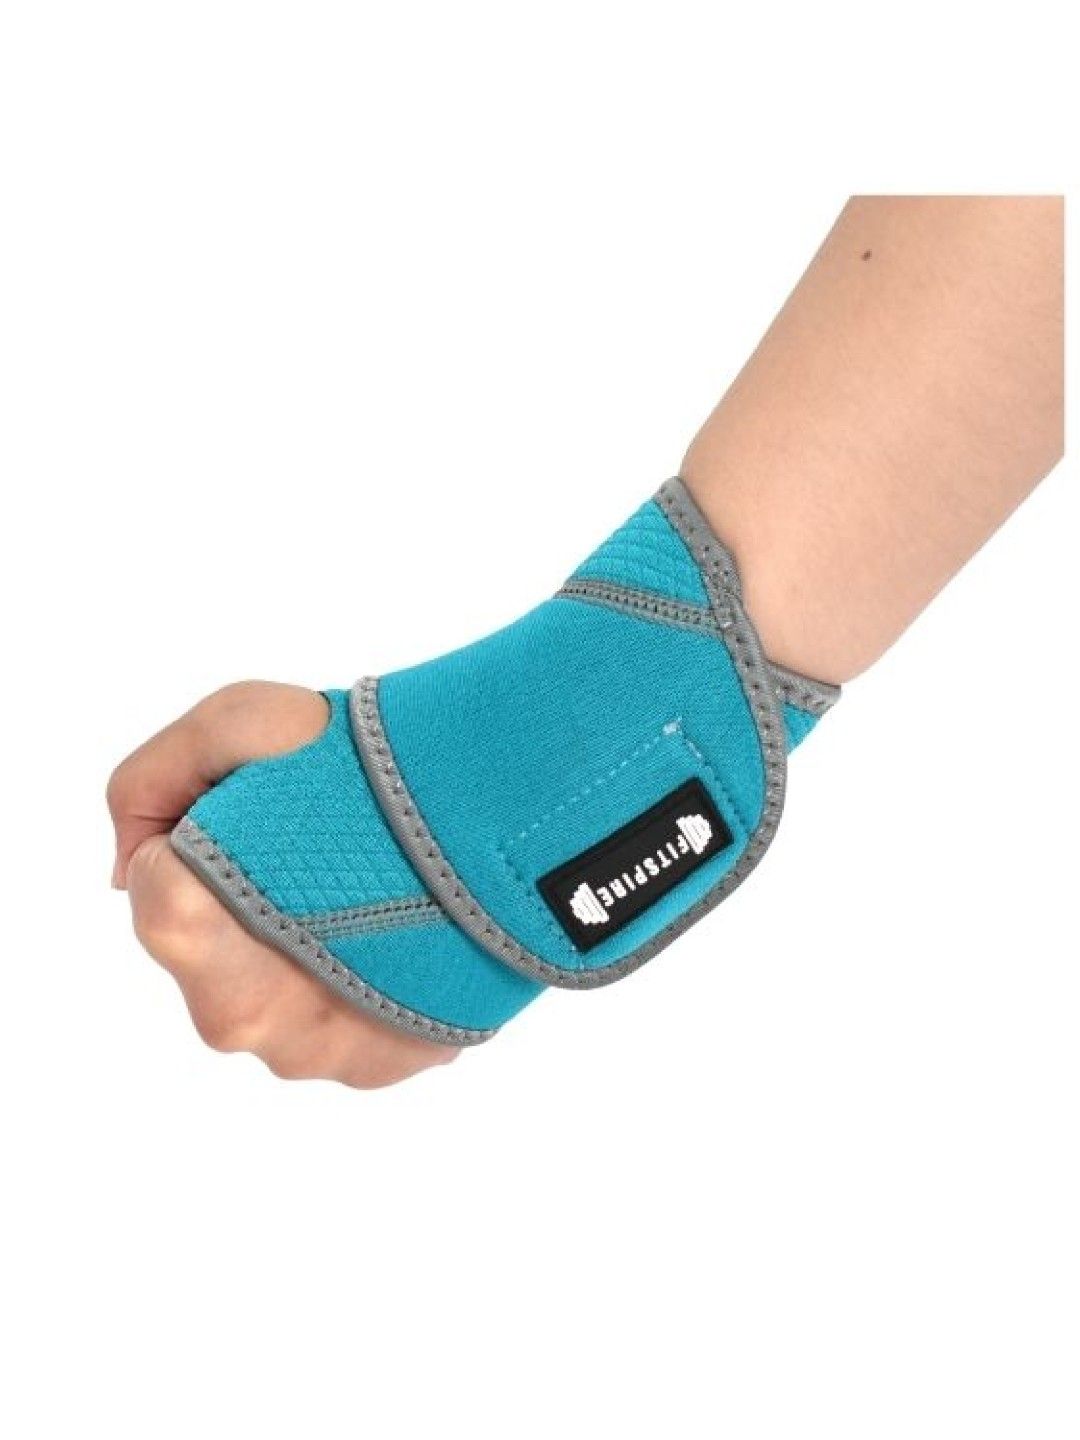 Sunbeams Lifestyle Fitspire Wrist Support Exercise/Fitness/Gym/Workout Equipment (No Color- Image 1)